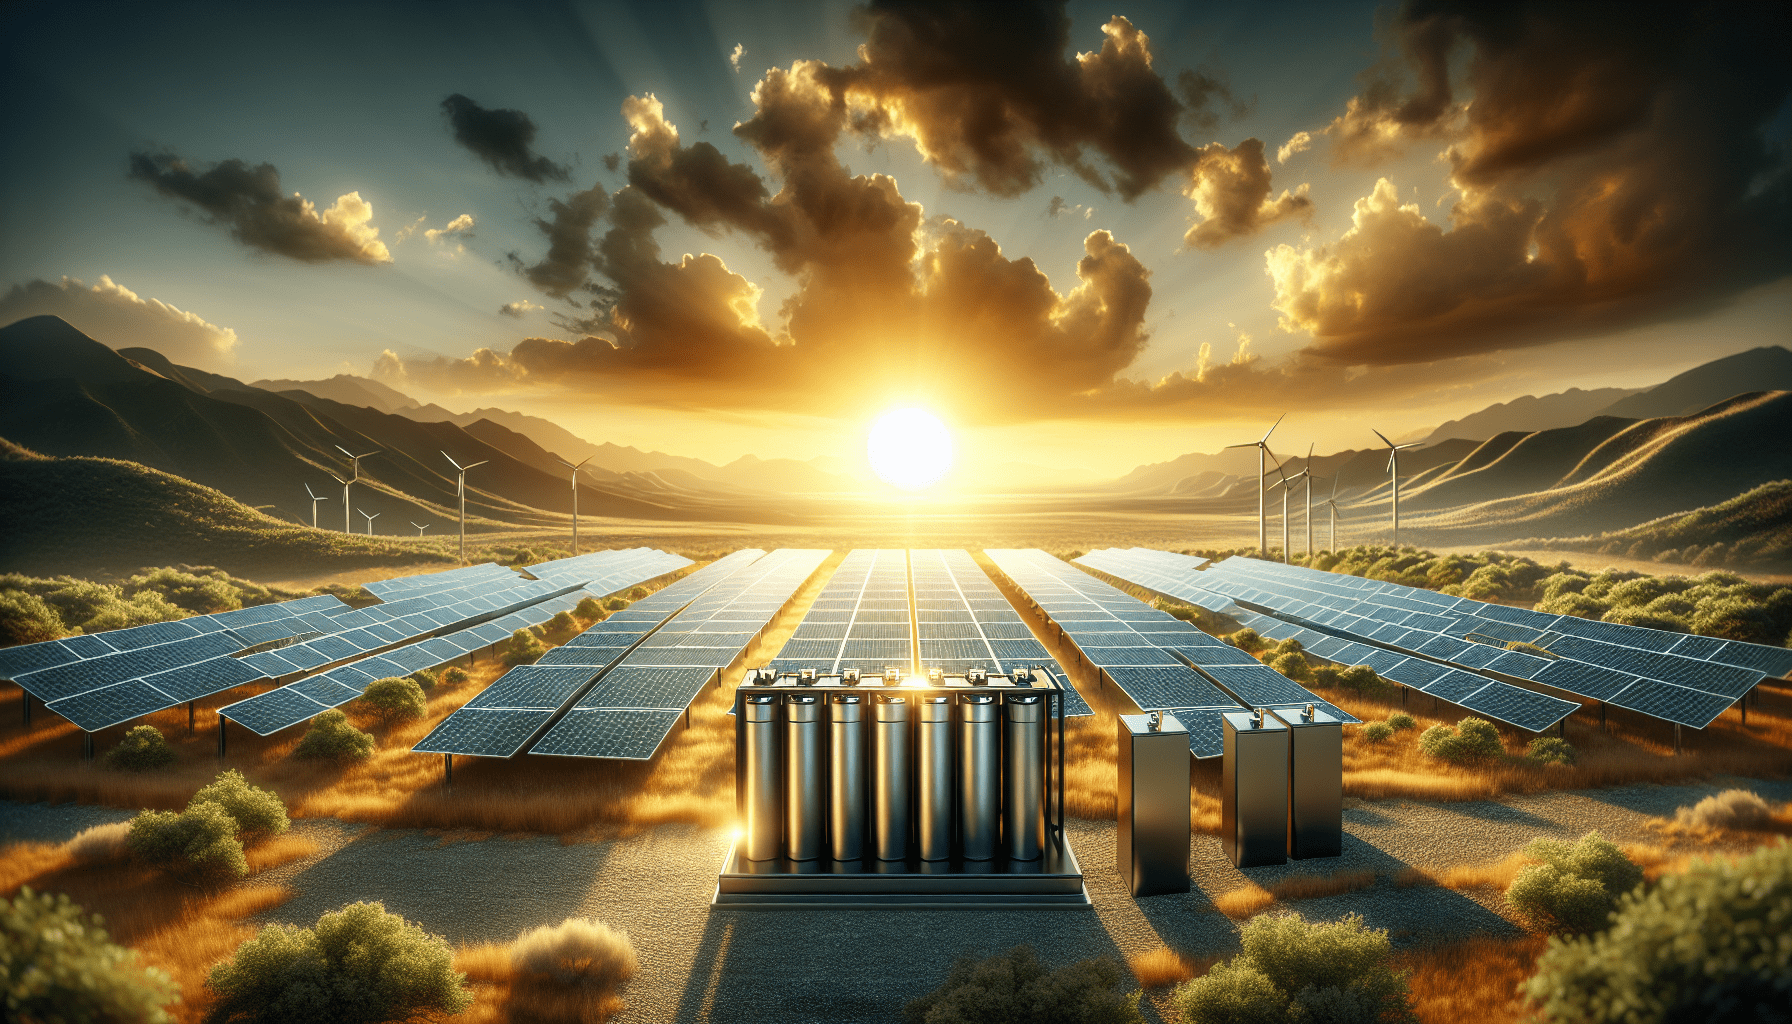 How To Safely Store Excess Solar Energy?